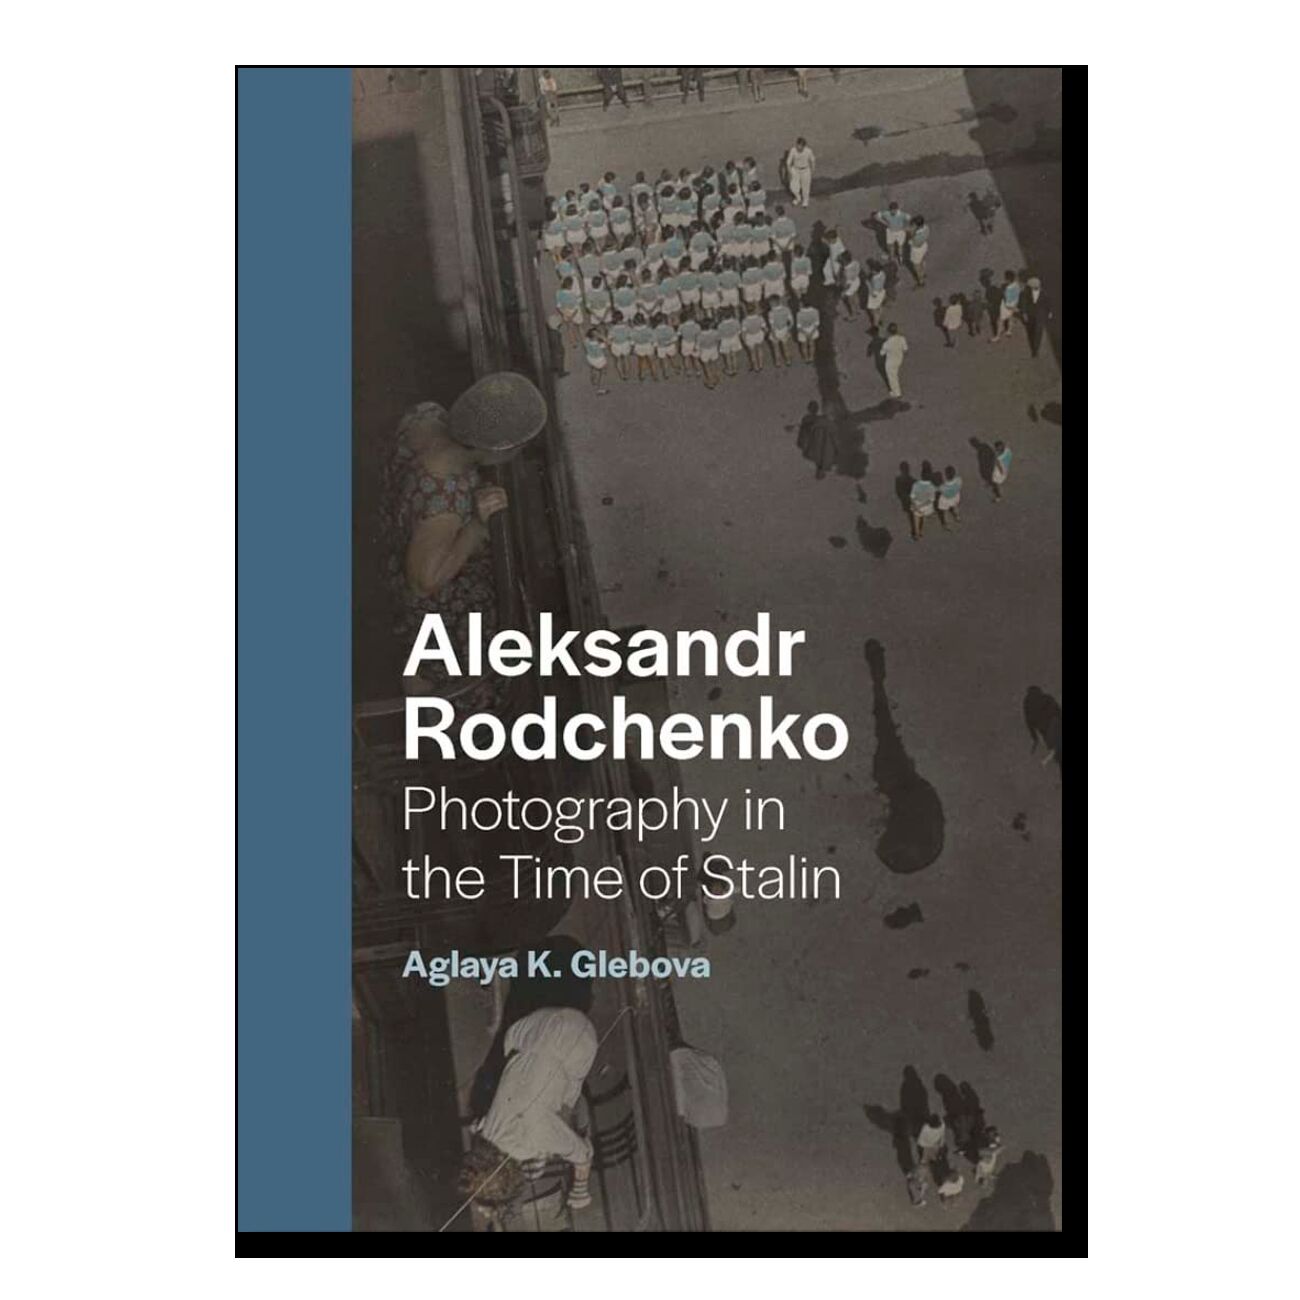 Aleksandr Rodchenko. Photography in the Time of Stalin